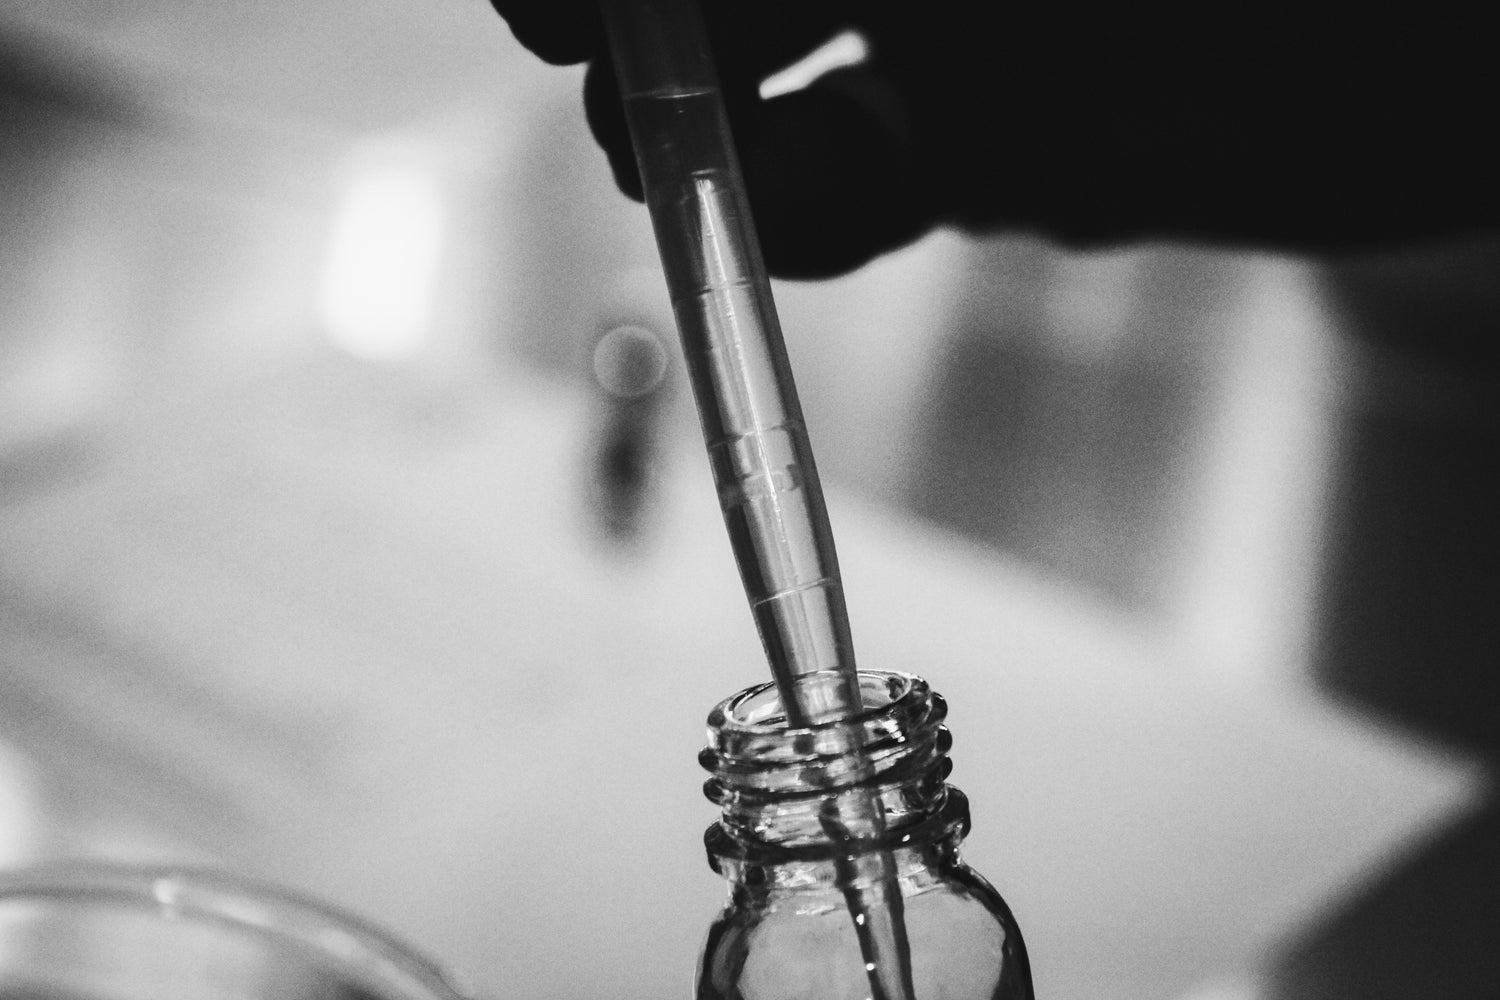 Close-up of a pipette dispensing liquid into a small vial, against a blurred background.